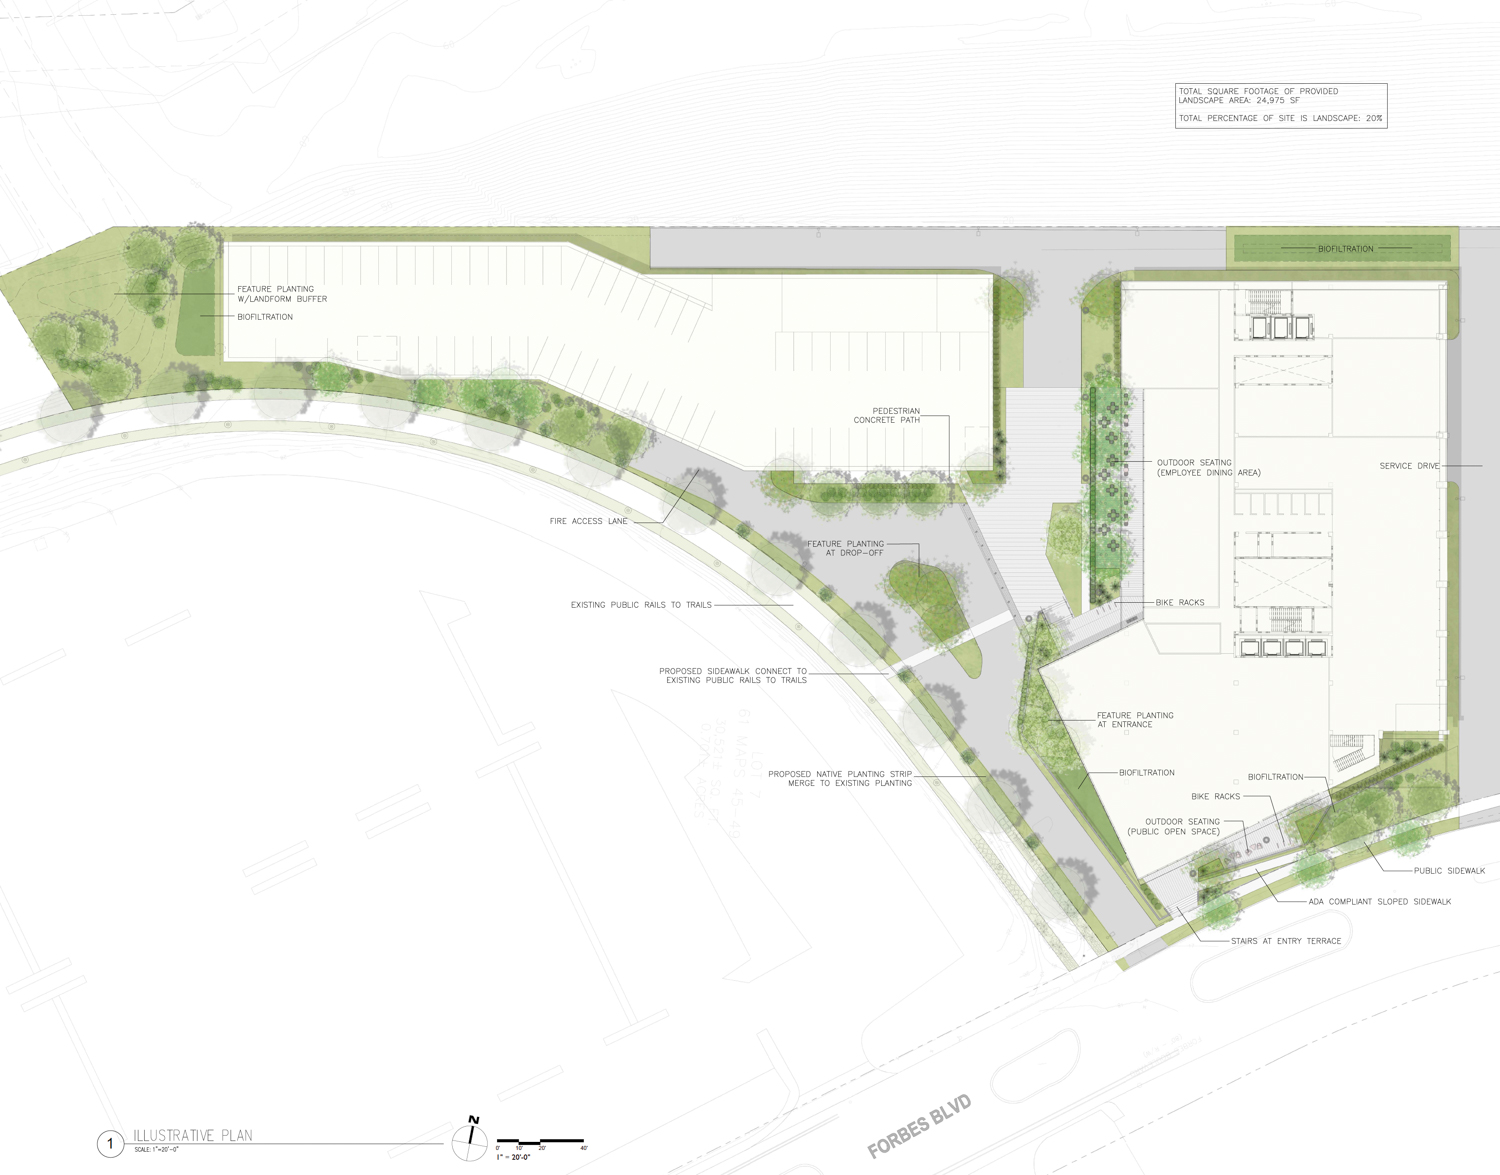 573 Forbes Boulevard ground-level site map, illustration by DGA